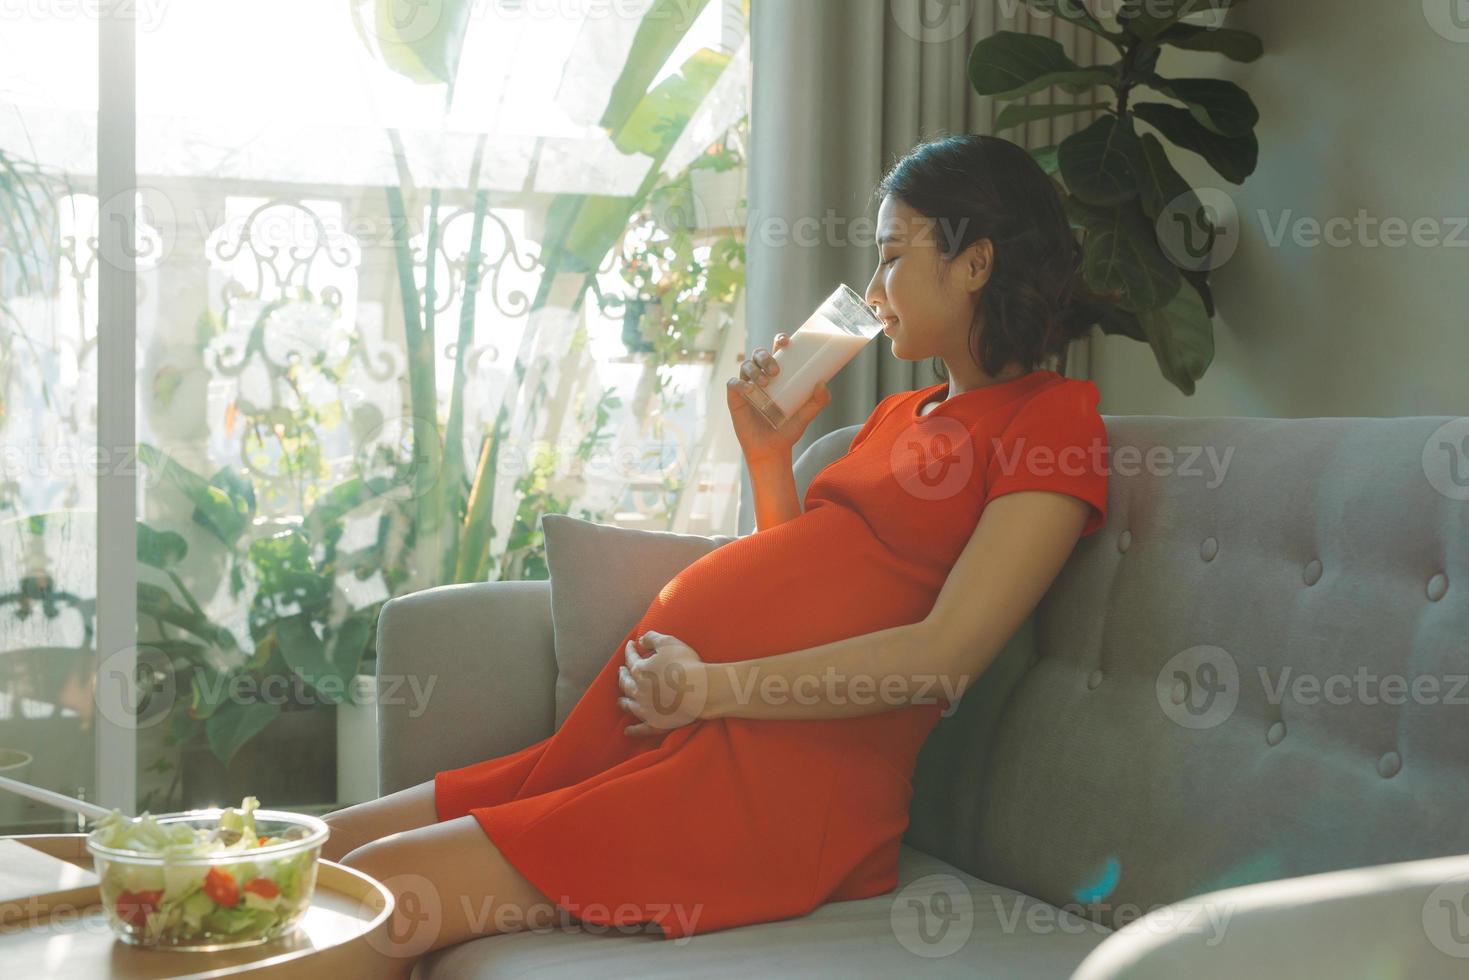 Healthy nutrition during pregnancy. Pregnant woman drinking milk, sitting on sofa, free space photo